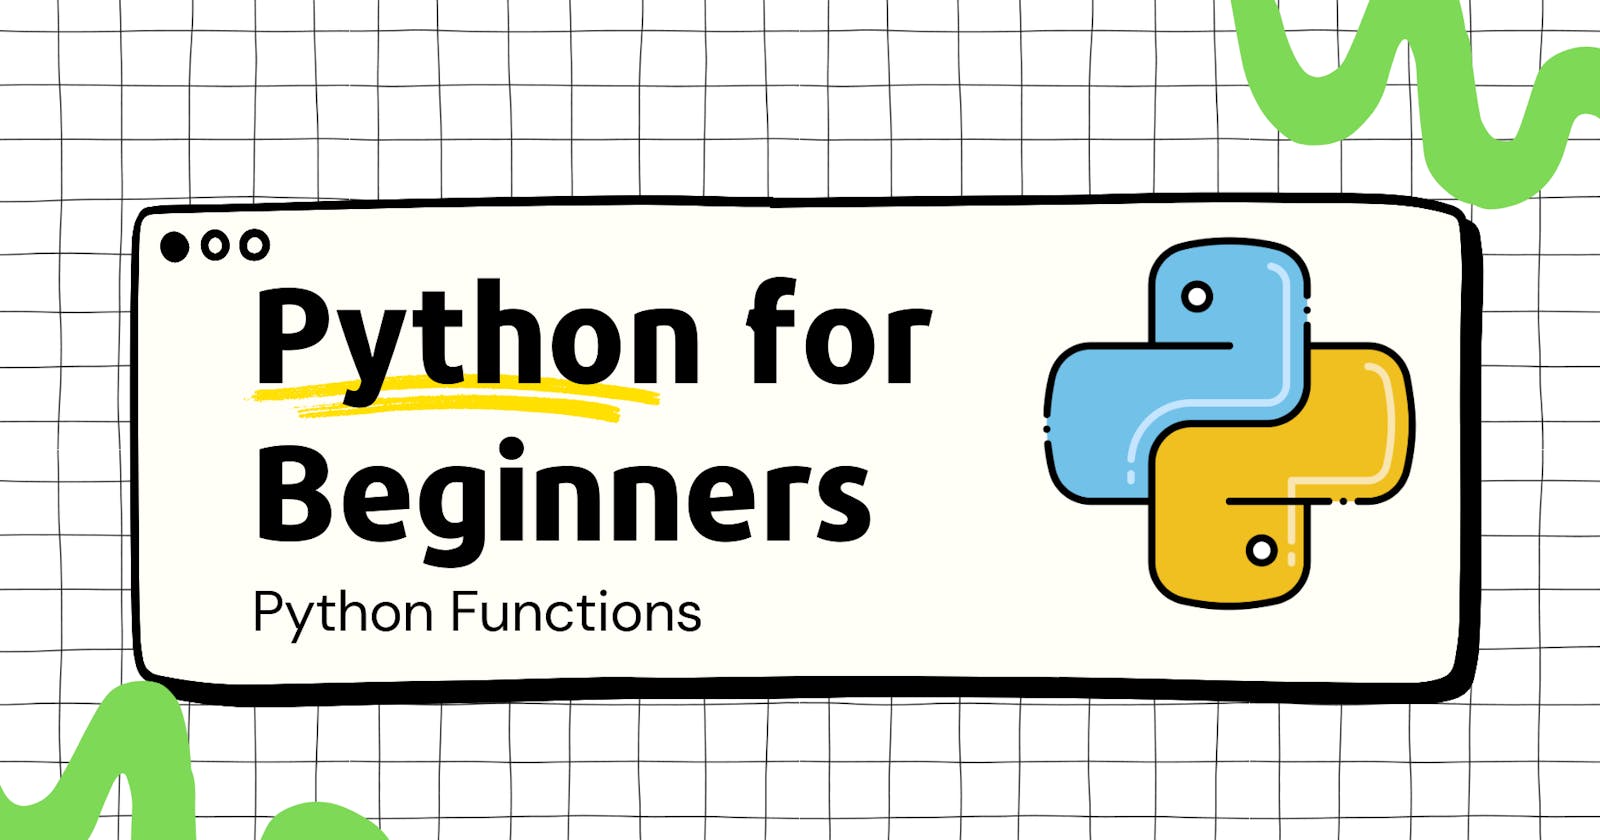 Python Functions for Beginners